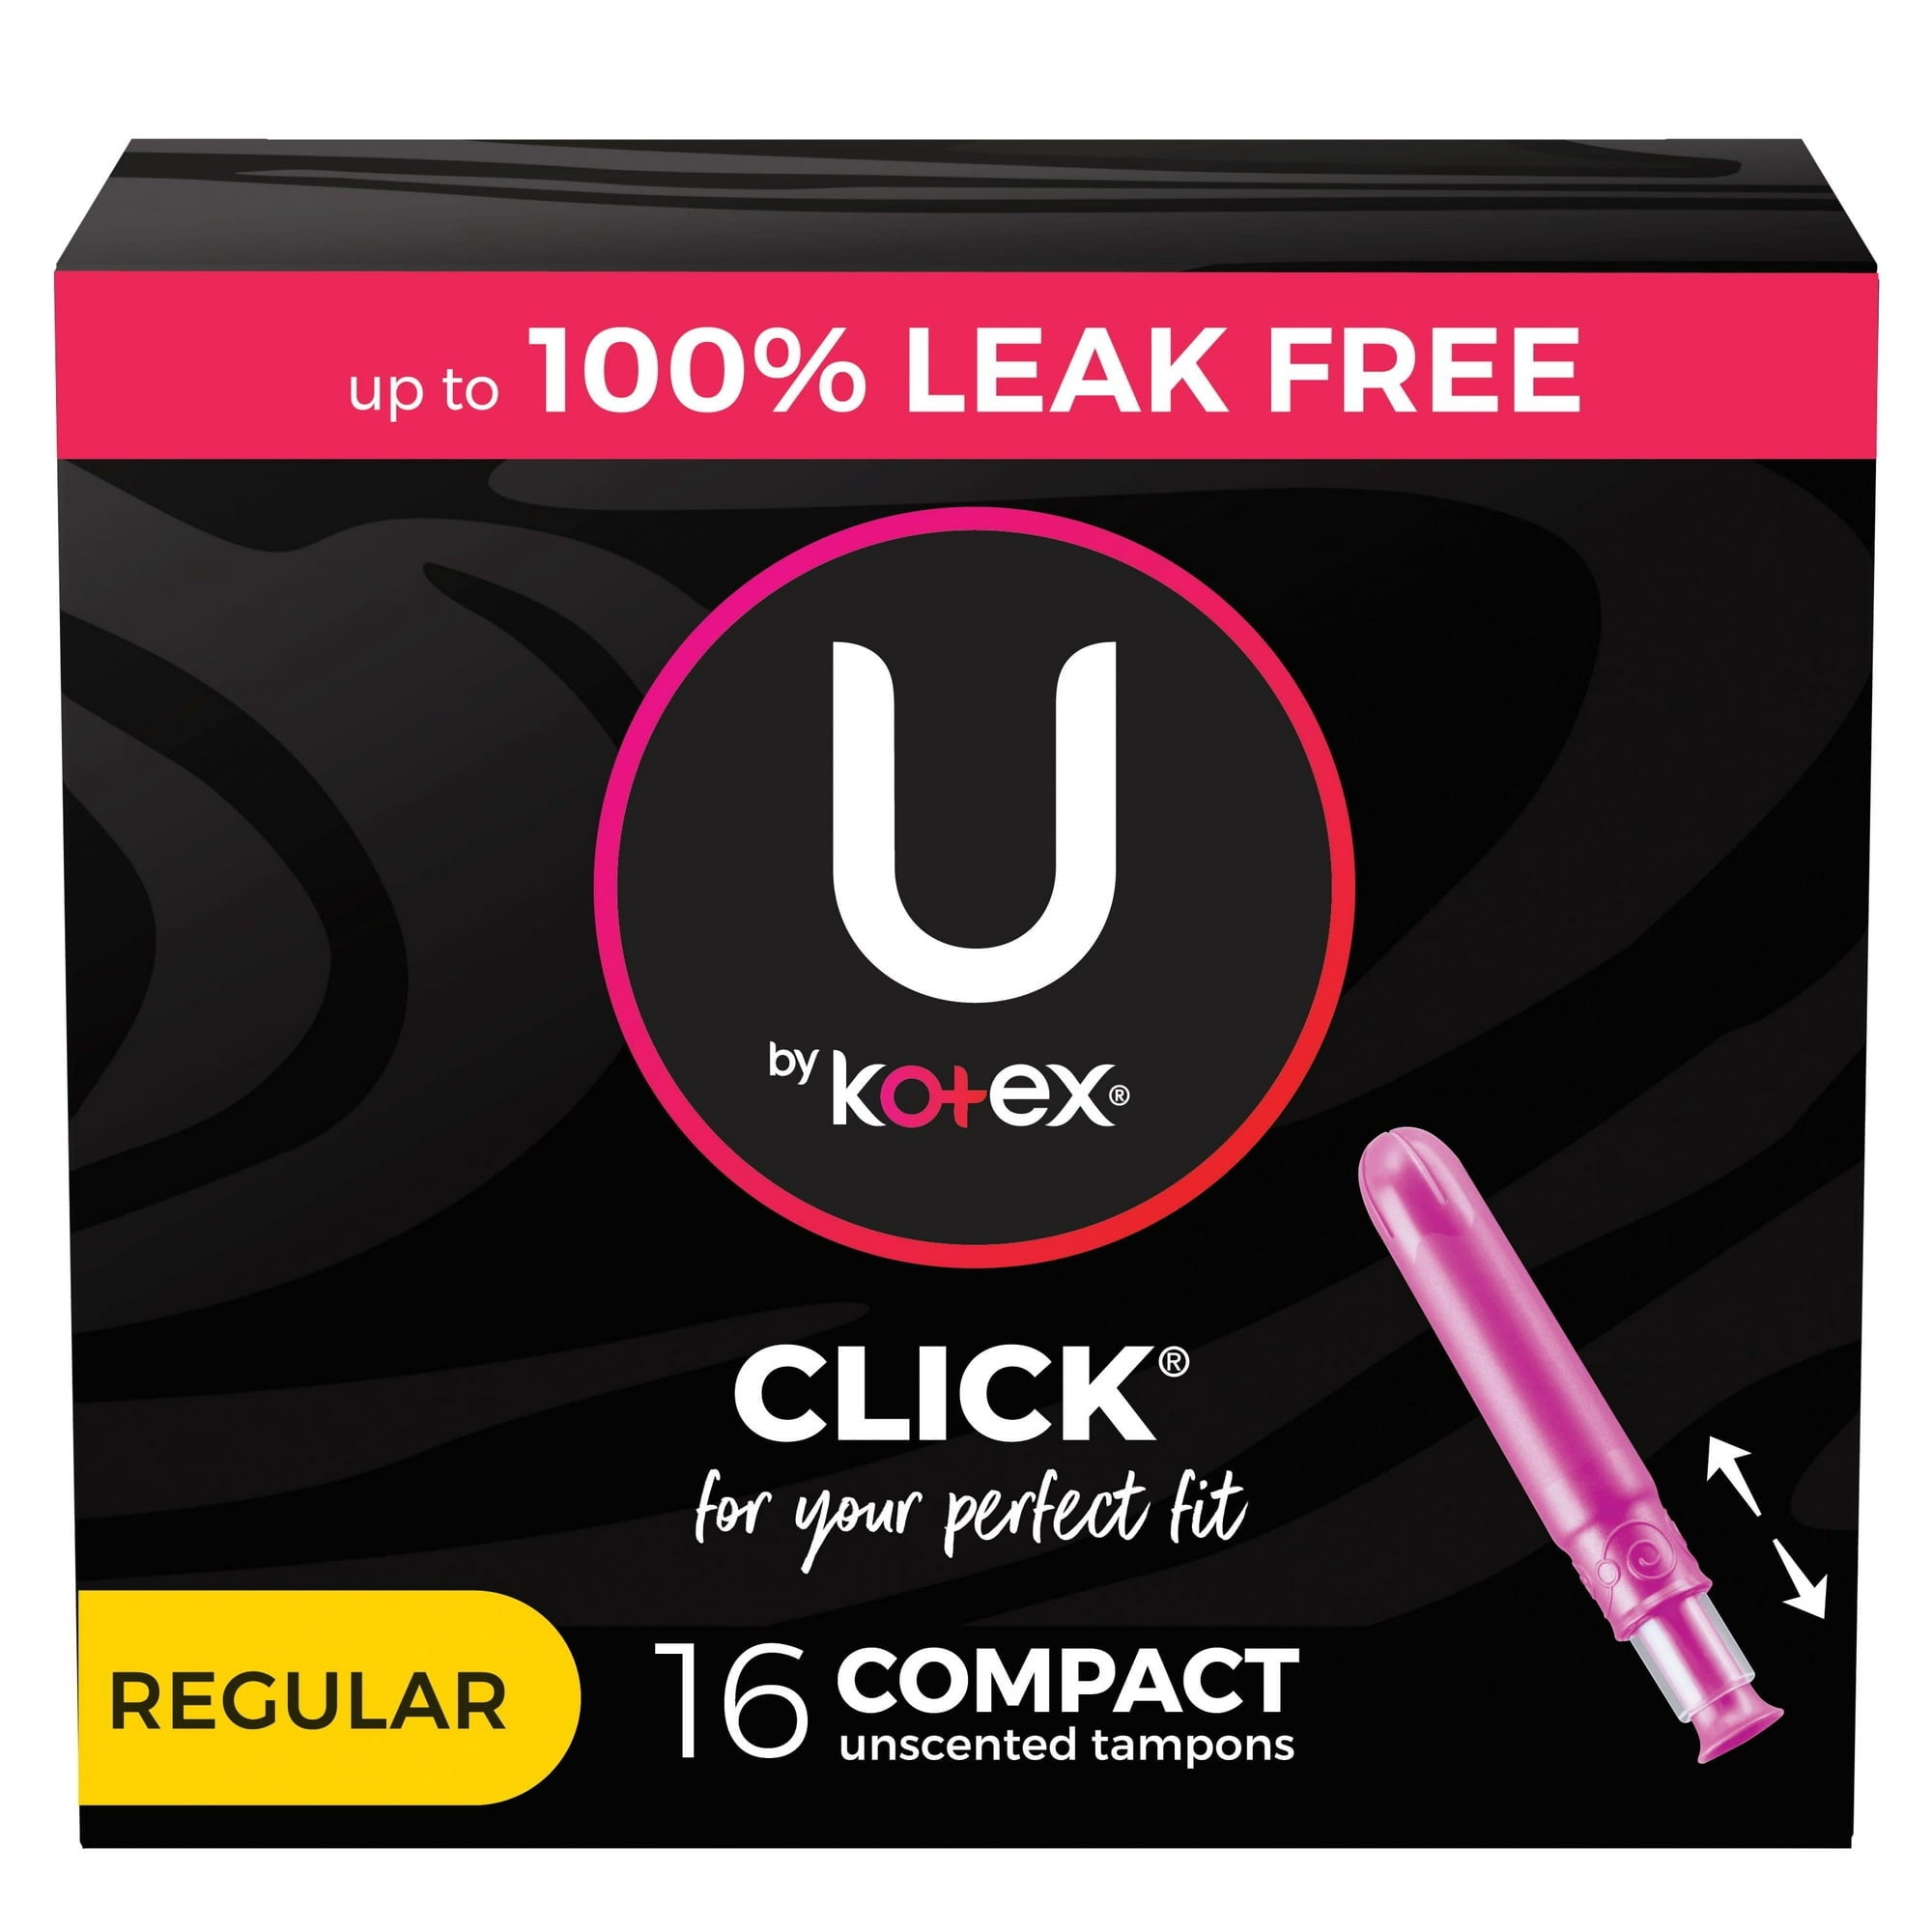 Tampons Regular - 16 compact unscented tampons